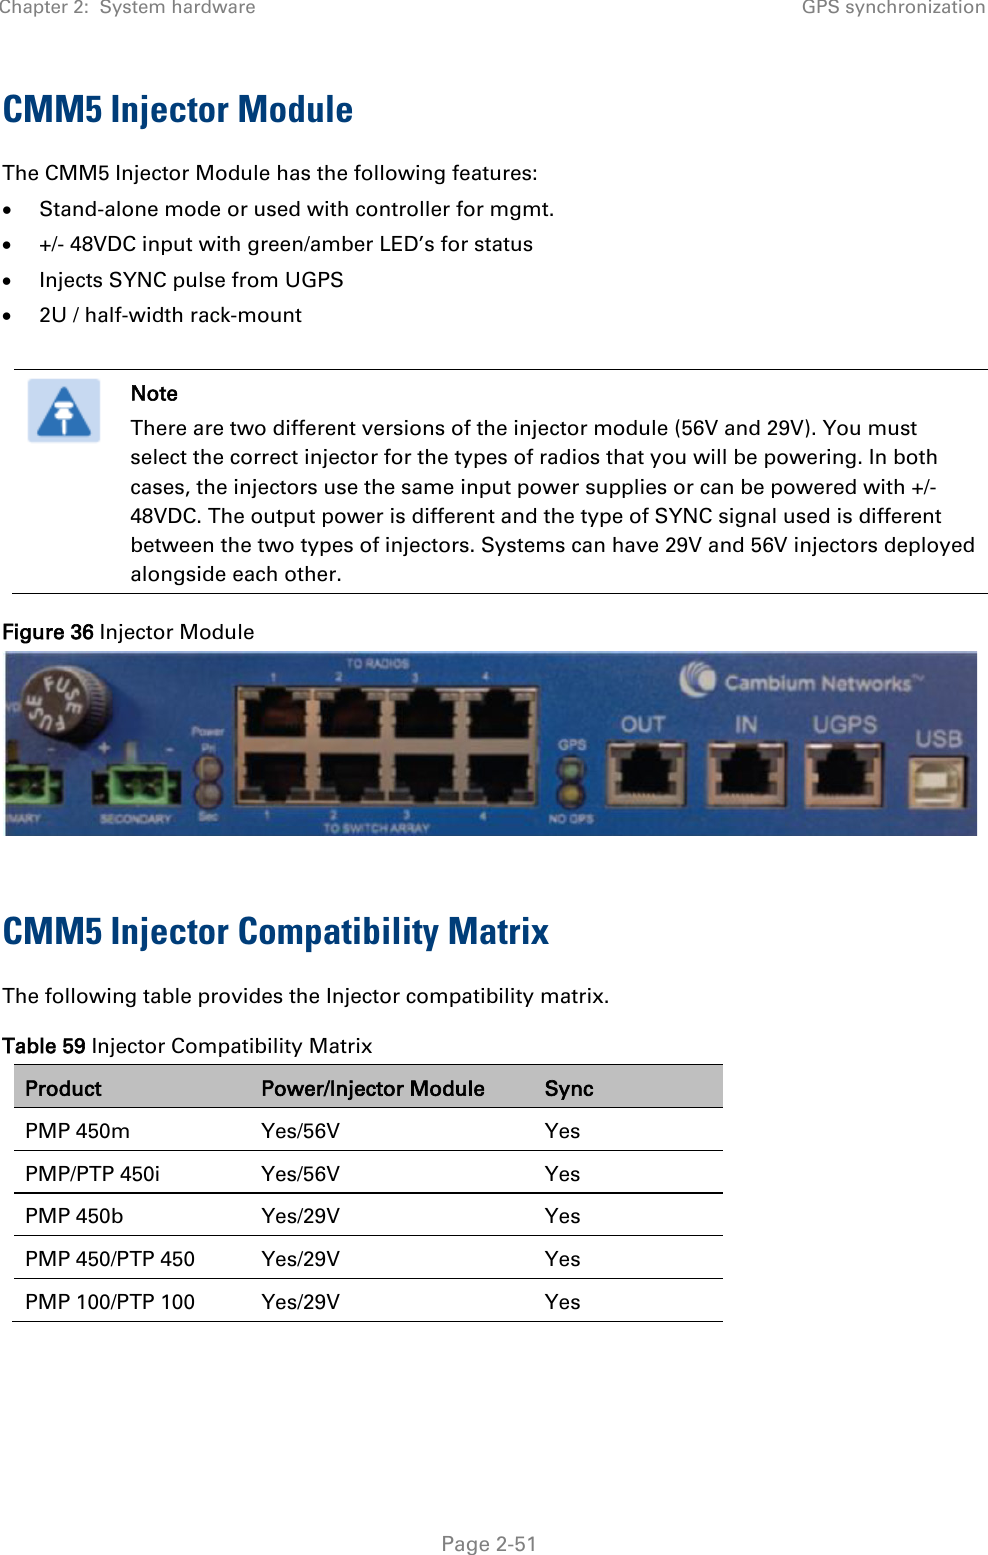 Chapter 2:  System hardware GPS synchronization   Page 2-51 CMM5 Injector Module The CMM5 Injector Module has the following features: • Stand-alone mode or used with controller for mgmt. • +/- 48VDC input with green/amber LED’s for status • Injects SYNC pulse from UGPS • 2U / half-width rack-mount   Note There are two different versions of the injector module (56V and 29V). You must select the correct injector for the types of radios that you will be powering. In both cases, the injectors use the same input power supplies or can be powered with +/- 48VDC. The output power is different and the type of SYNC signal used is different between the two types of injectors. Systems can have 29V and 56V injectors deployed alongside each other. Figure 36 Injector Module   CMM5 Injector Compatibility Matrix The following table provides the Injector compatibility matrix. Table 59 Injector Compatibility Matrix Product Power/Injector Module Sync PMP 450m Yes/56V Yes PMP/PTP 450i Yes/56V Yes PMP 450b  Yes/29V  Yes PMP 450/PTP 450 Yes/29V Yes PMP 100/PTP 100 Yes/29V Yes  